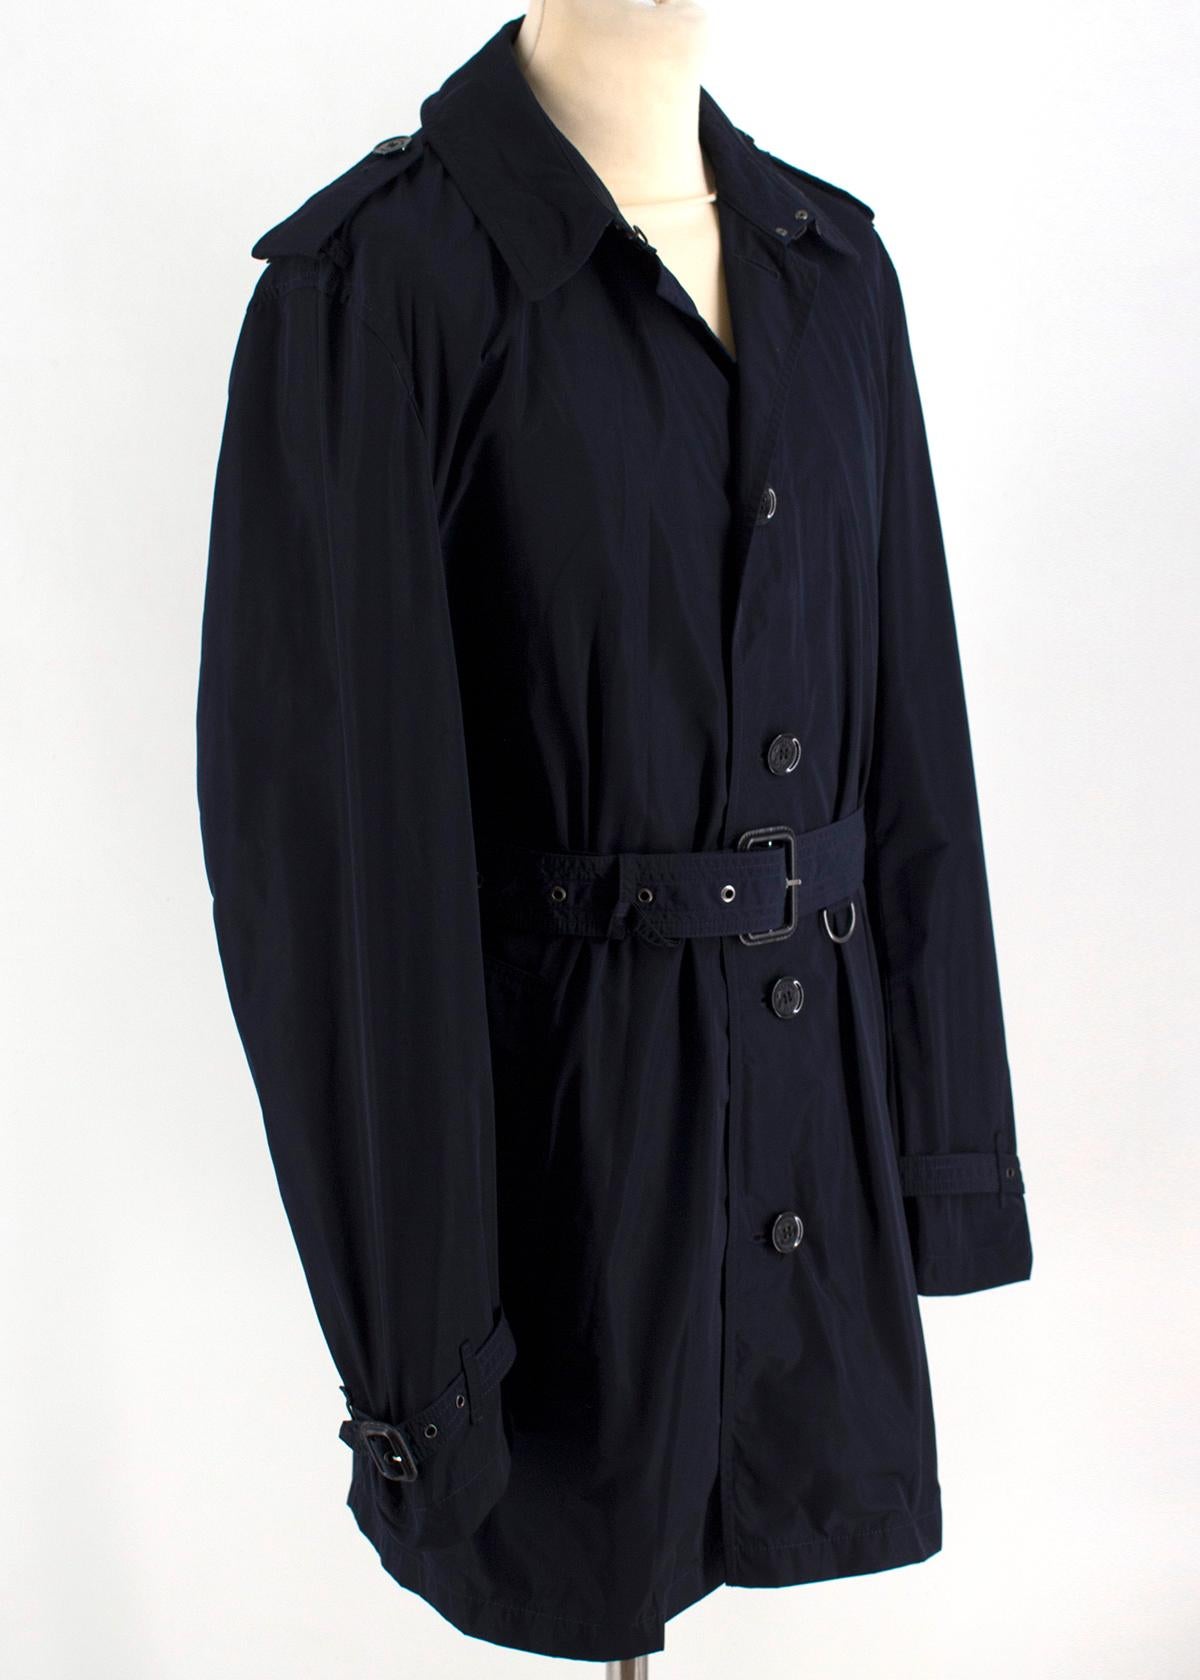 Burberry Quintessential Black Trench Coat 

- Black, single-breasted, mid-length tailored trench coat. 
- Hook-and-eye collar closure. 
- Gun flap with belted cuffs and D-ring belt
- Rear central vent and monochrome grey check lining.
- Slanted flap